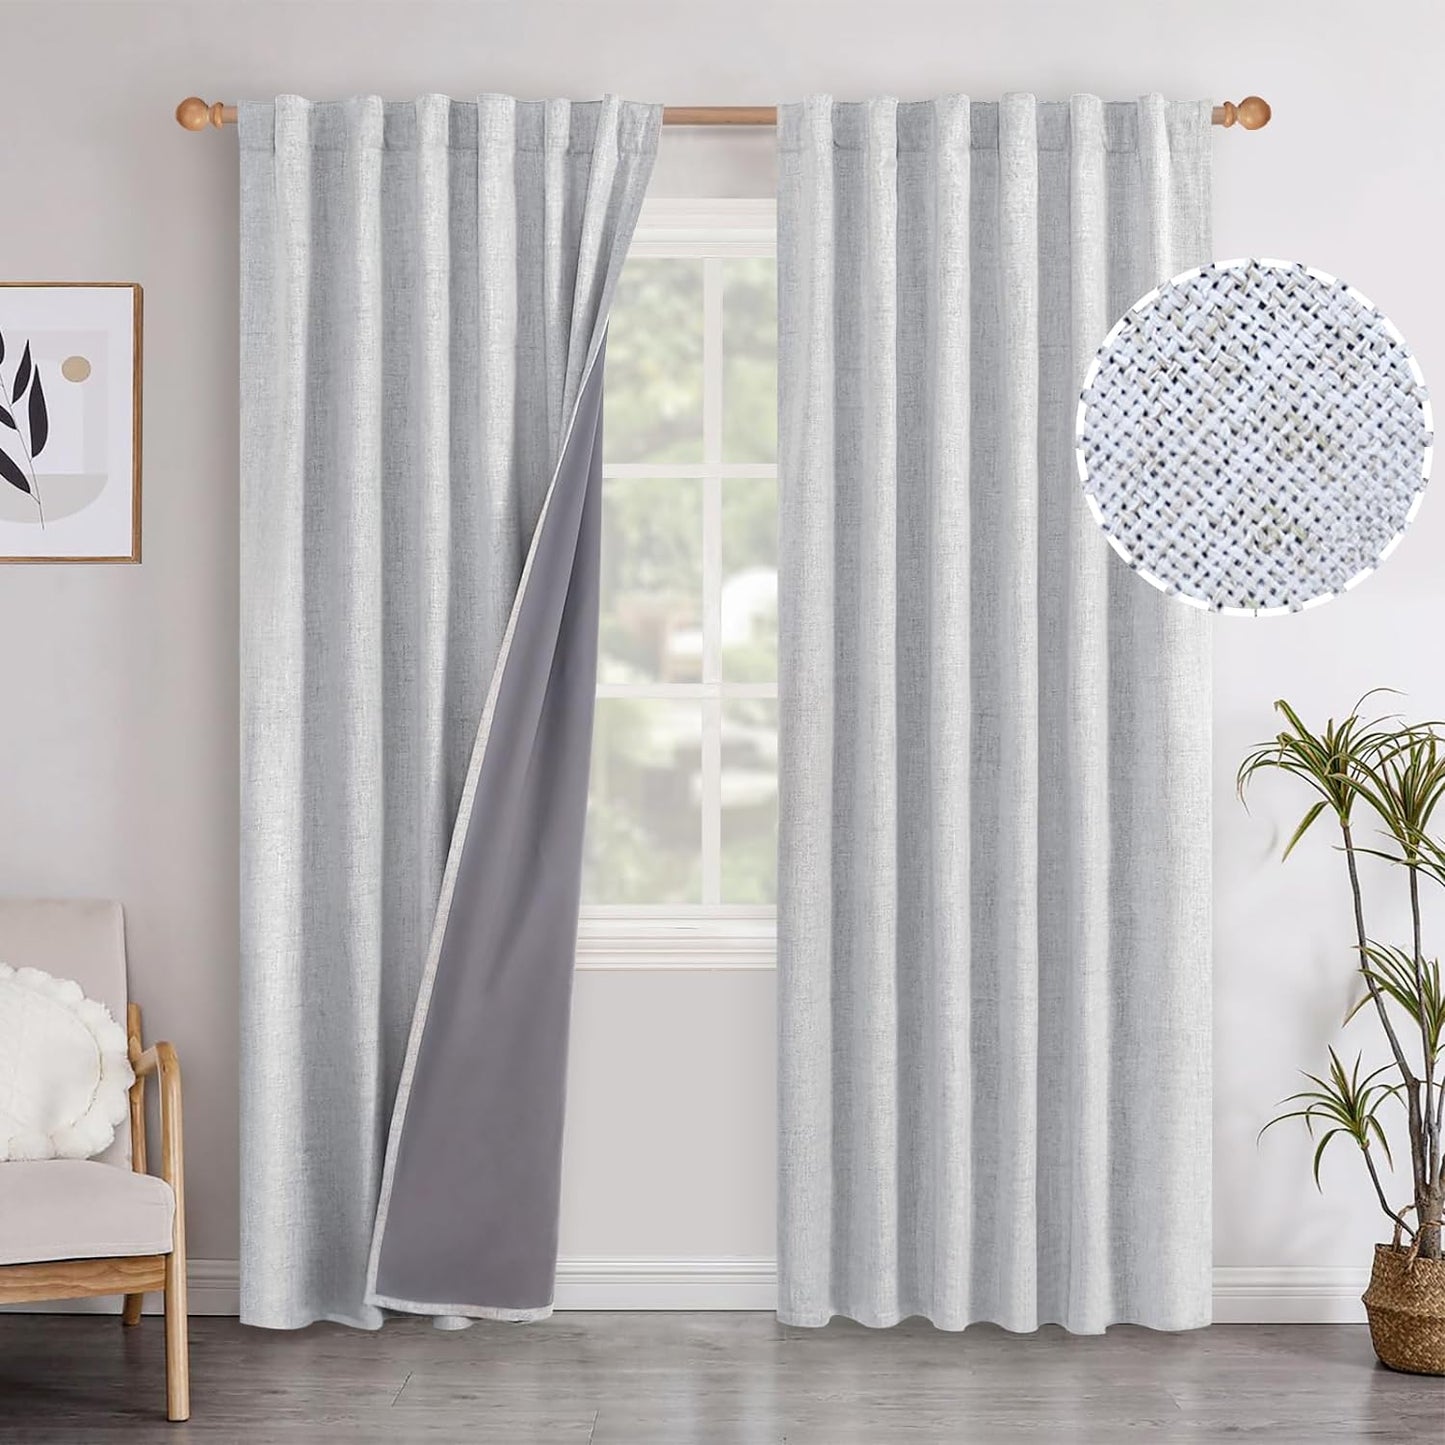 Youngstex Linen Blackout Curtains 63 Inch Length, Grommet Darkening Bedroom Curtains Burlap Linen Window Drapes Thermal Insulated for Basement Summer Heat, 2 Panels, 52 X 63 Inch, Beige  YoungsTex Back Tab/Linen 52W X 95L 